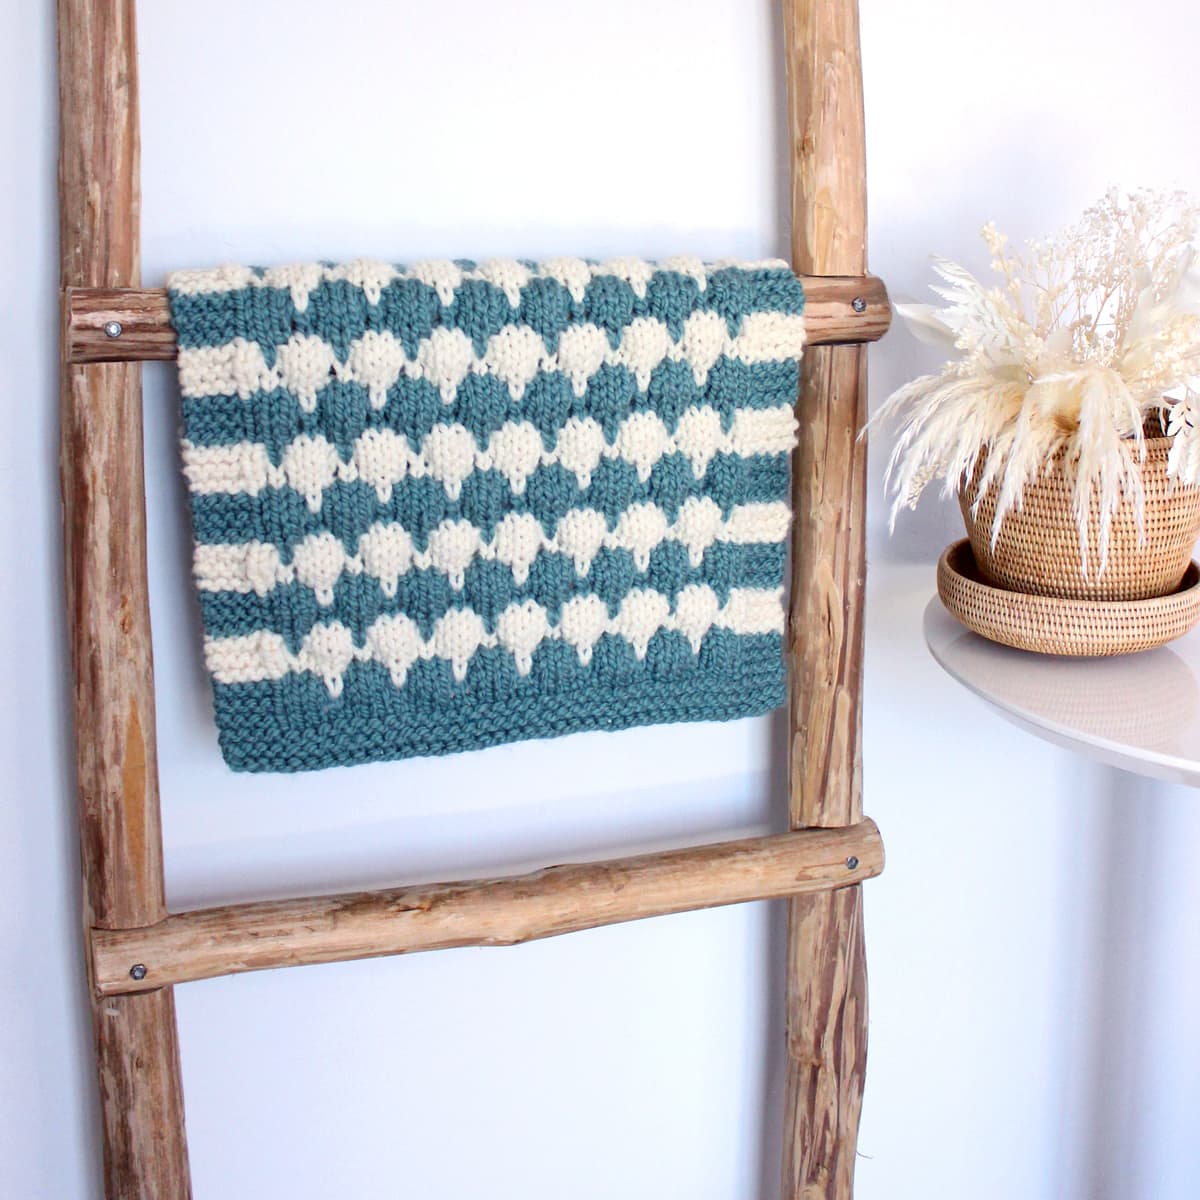 Chunky bubble stitch blanket displayed on rustic ladder.